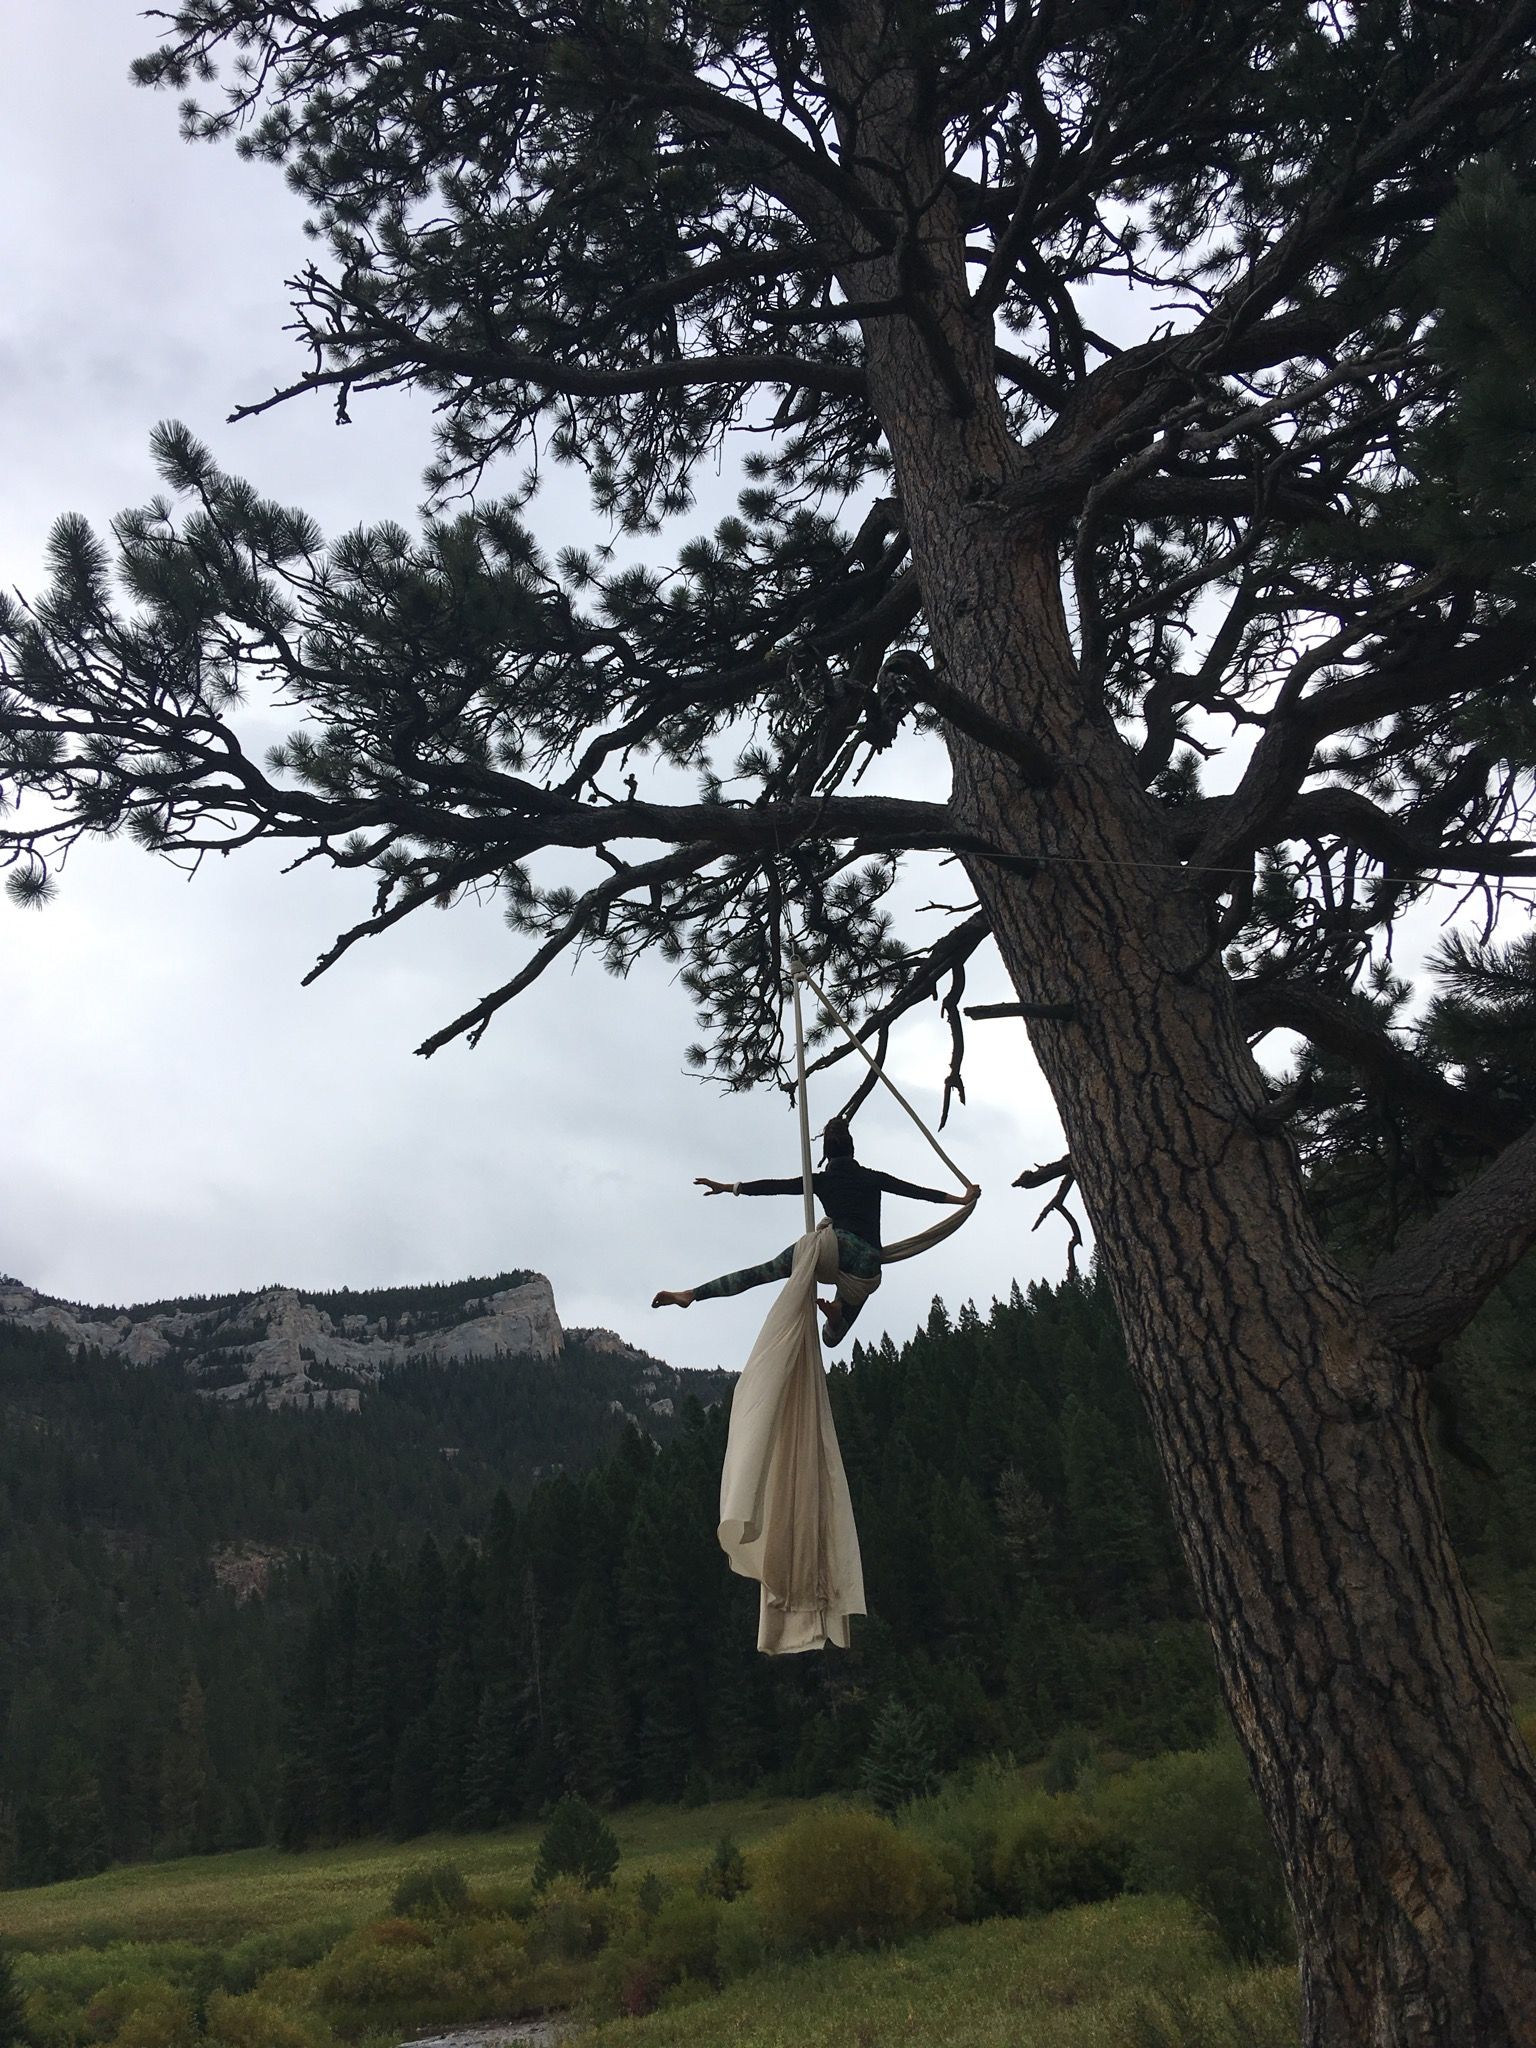 Woman wearing a black leotard doing aerial acrobatics with white fabric, hanging from a giant ponderosa tree in a forest landscape.